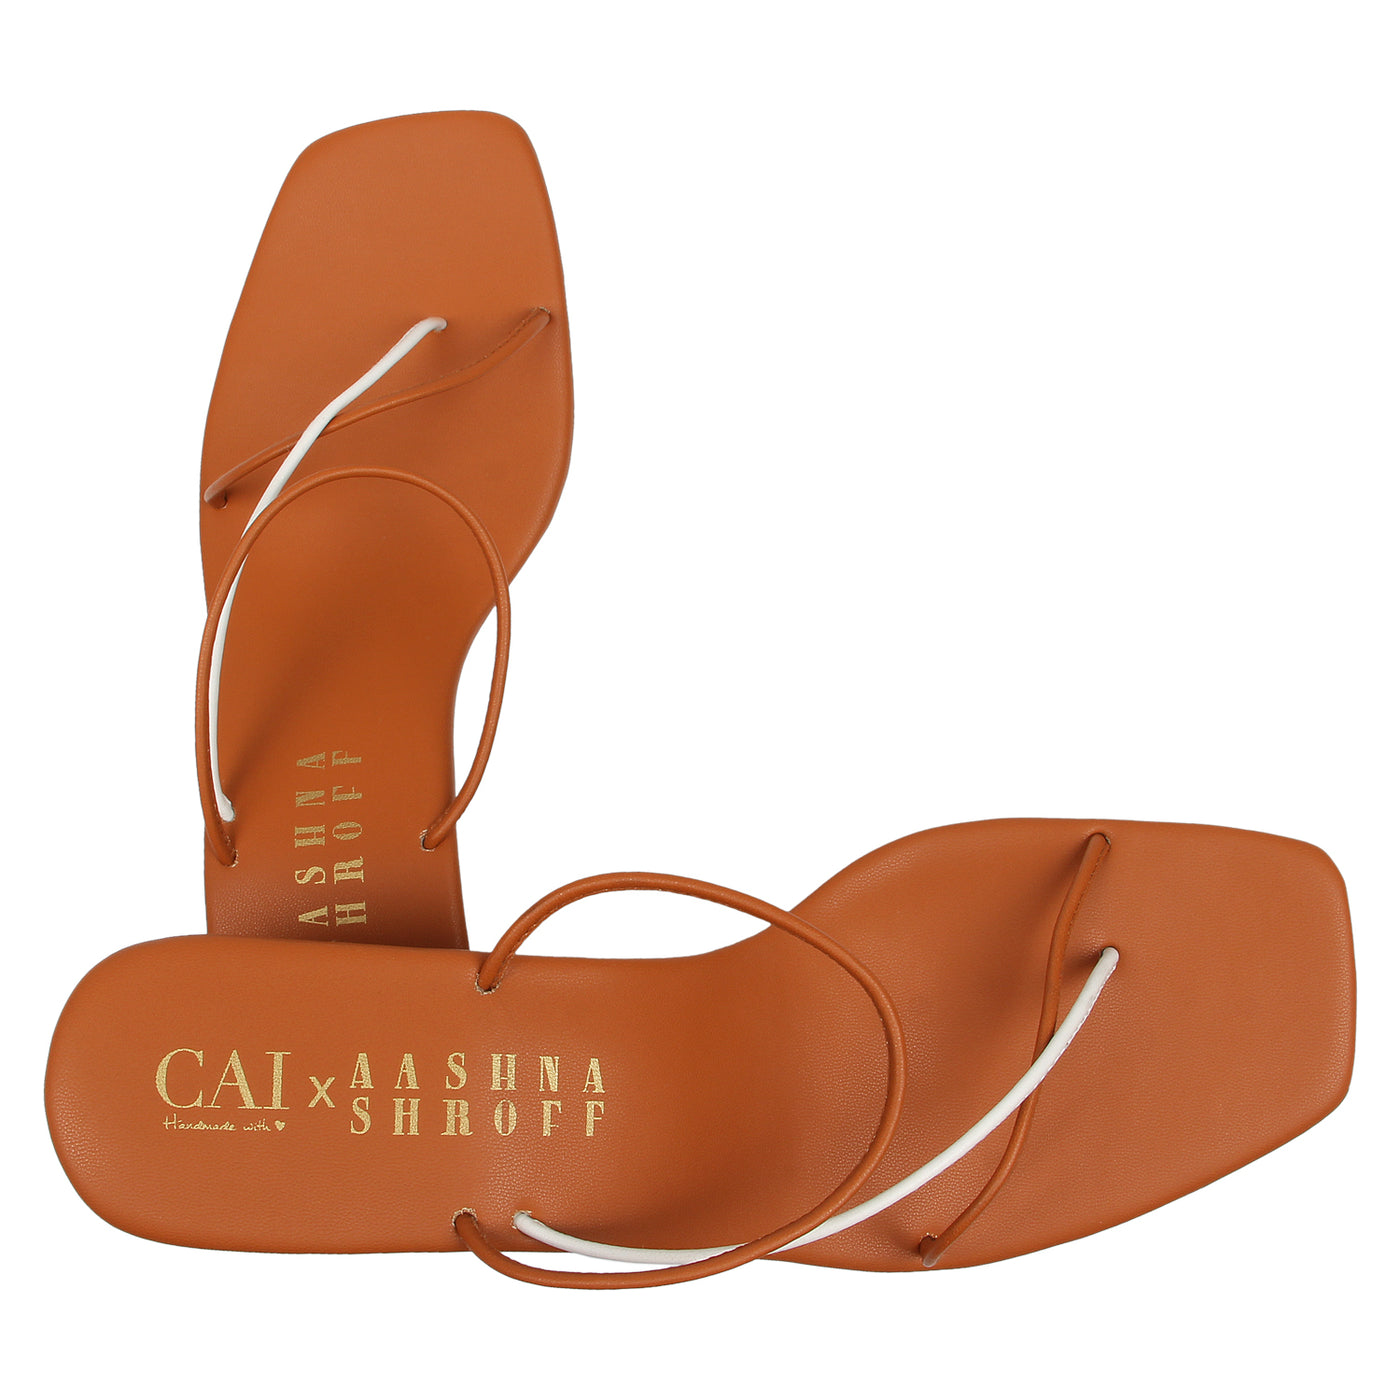 Two Many lines Tan Heels at The Cai Store